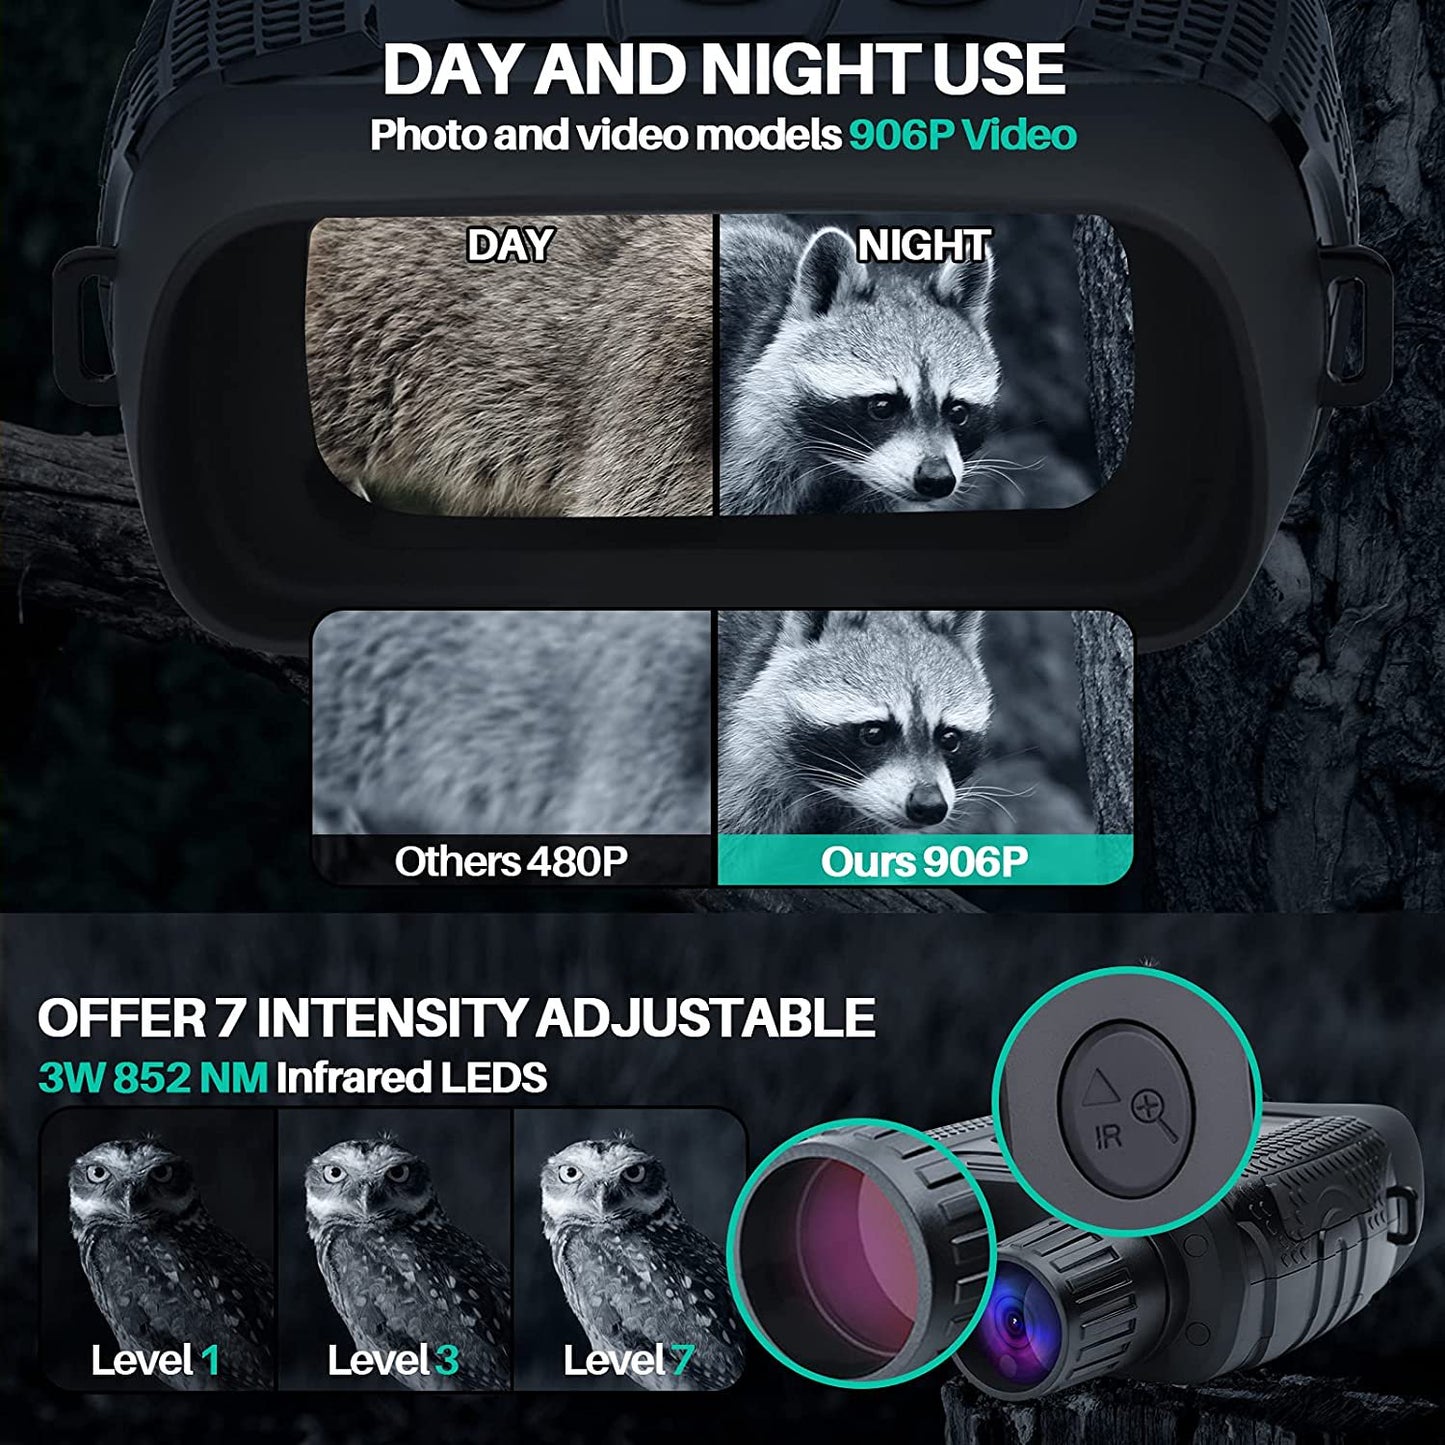 Night Vision Goggles -4x Digital Zoom Binoculars with Night Vision for Total Darkness,with 32GB Memory Card Wifi Remote Control for Photo and Video Storage